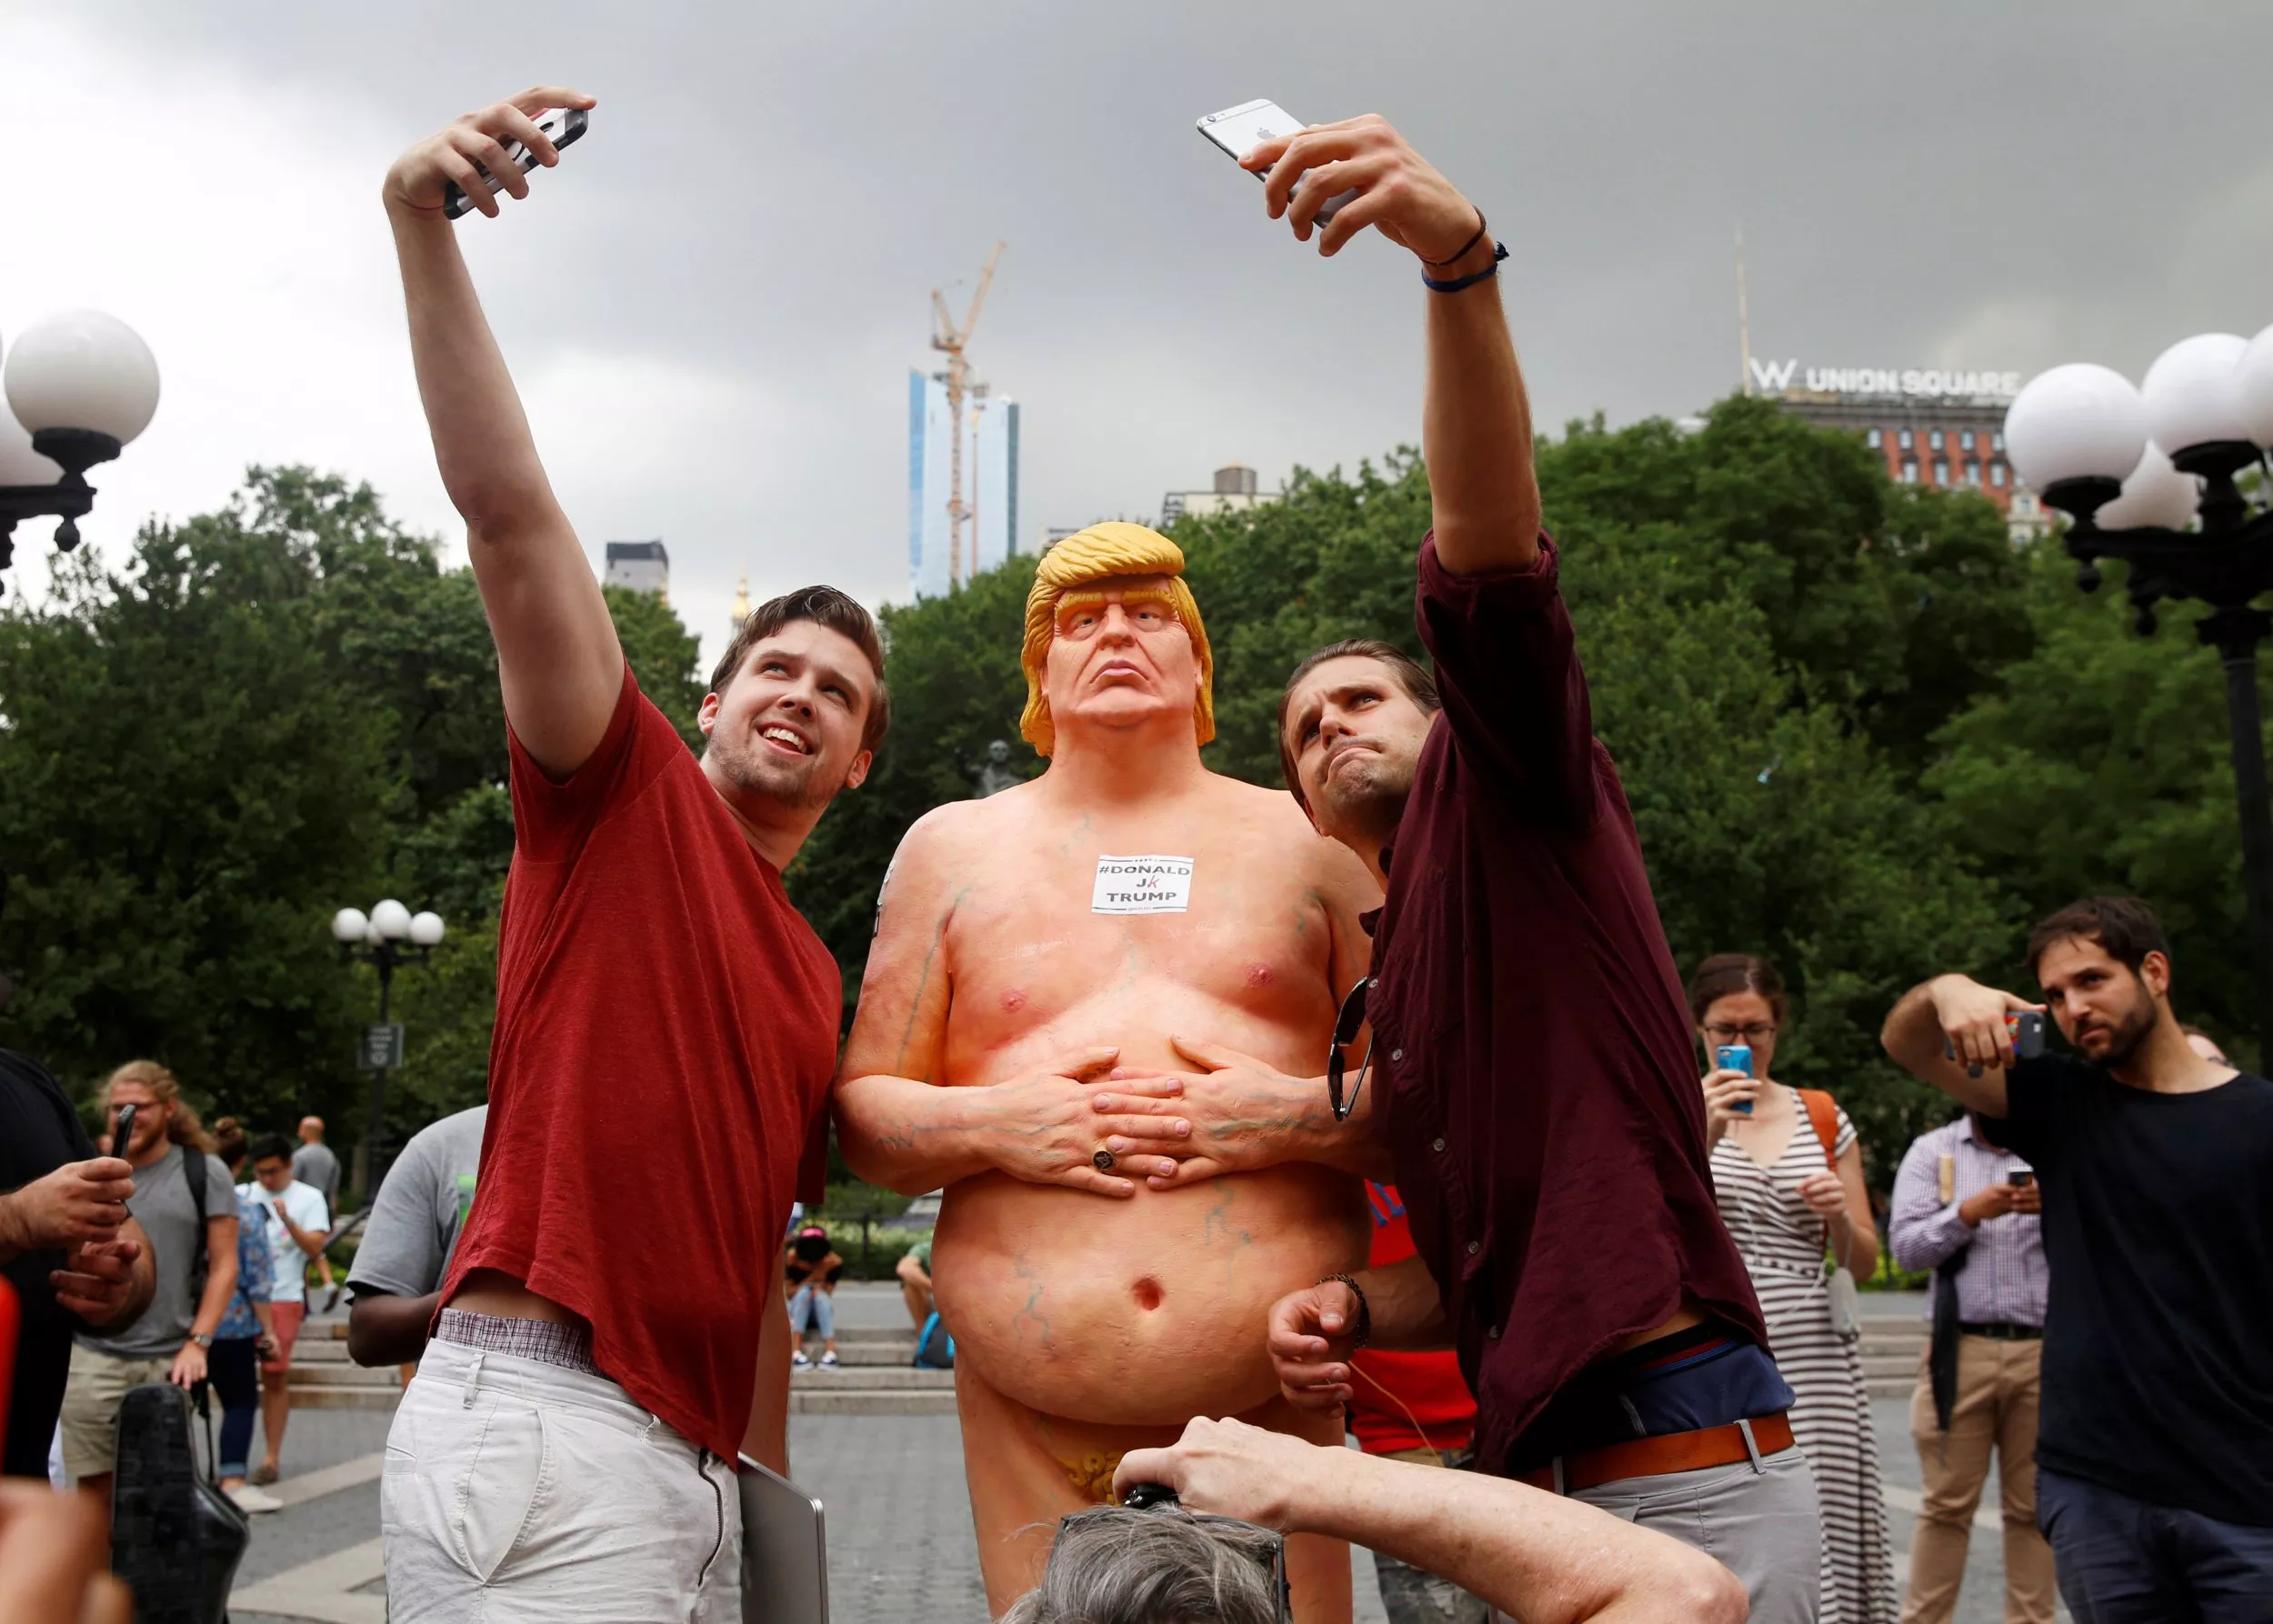 Naked Donald Trump Statues Erected pic